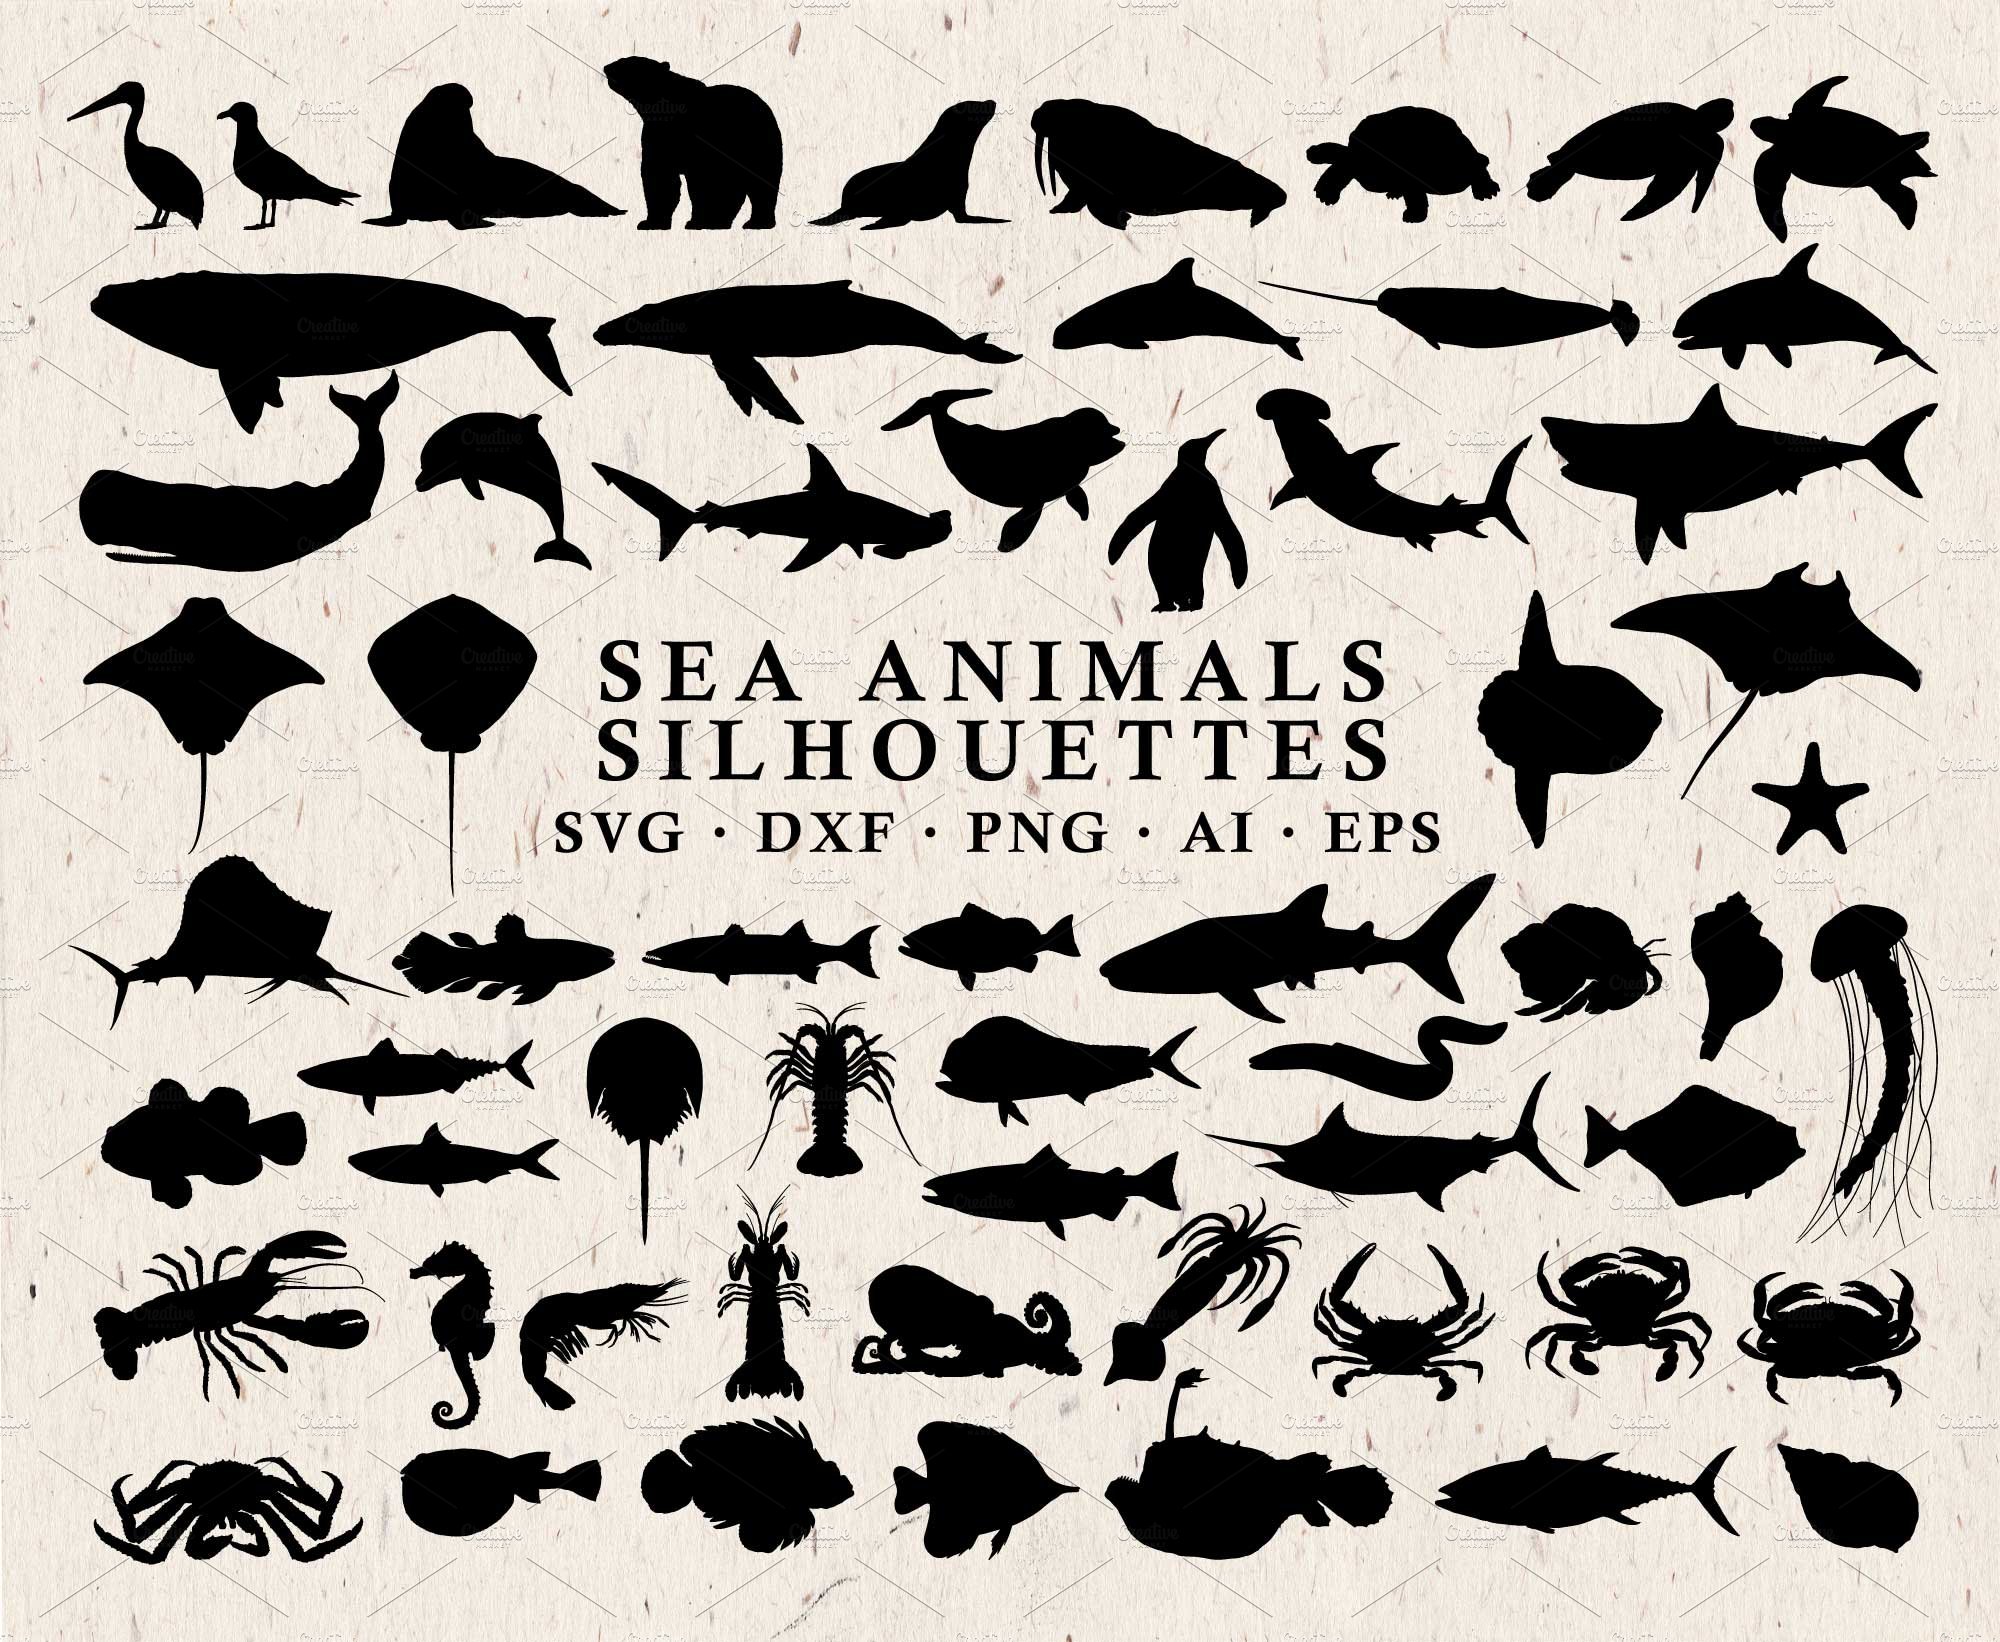 Sea Animals Silhouettes Vector Pack cover image.